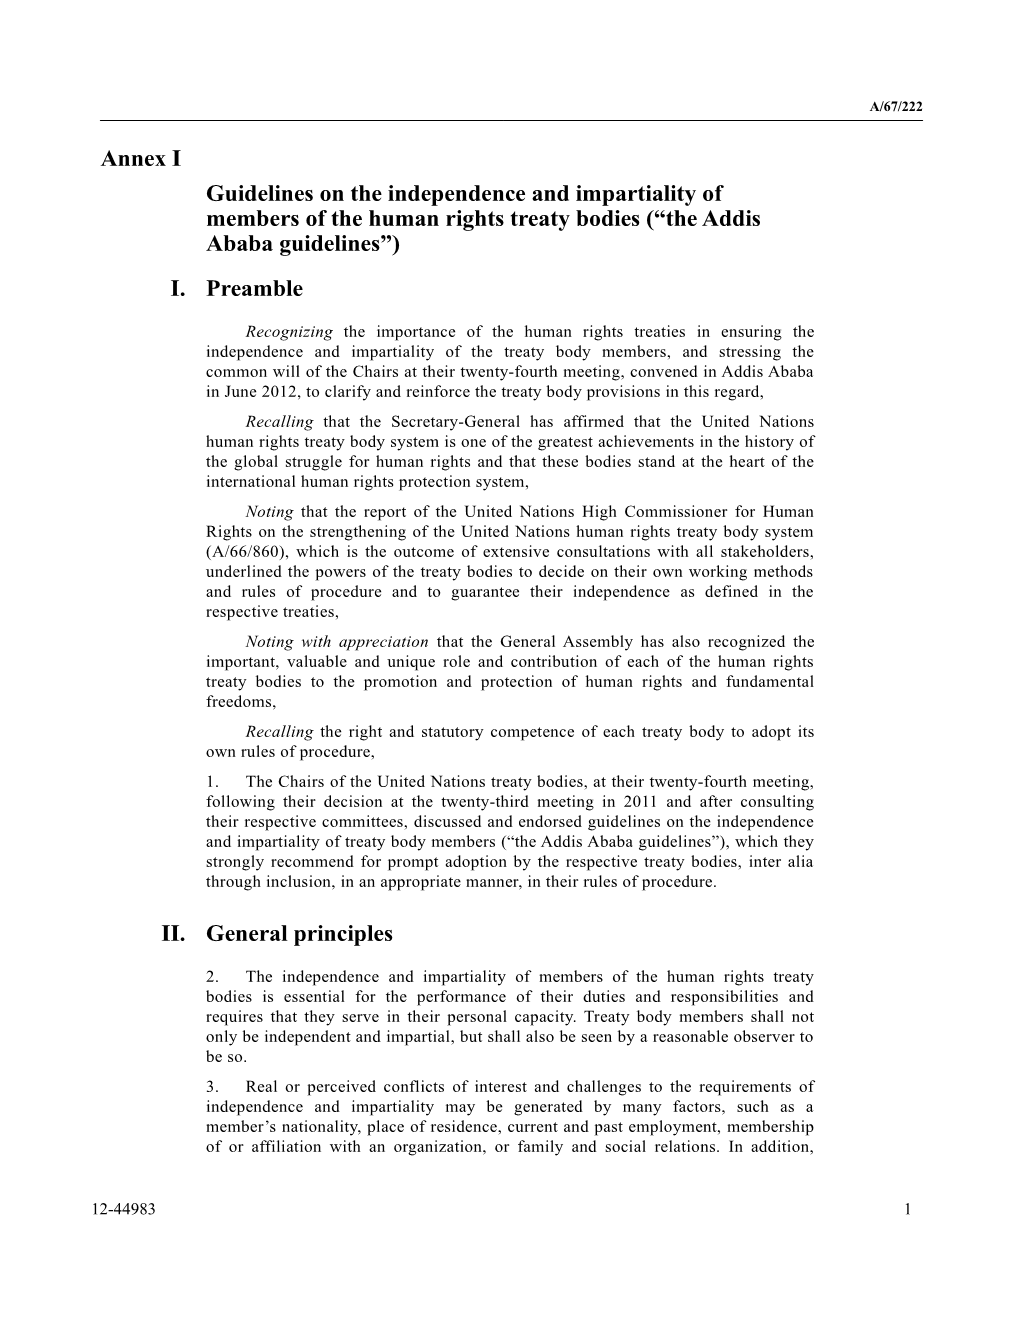 Guidelines on the Independence and Impartiality of Members of the Human Rights Treaty